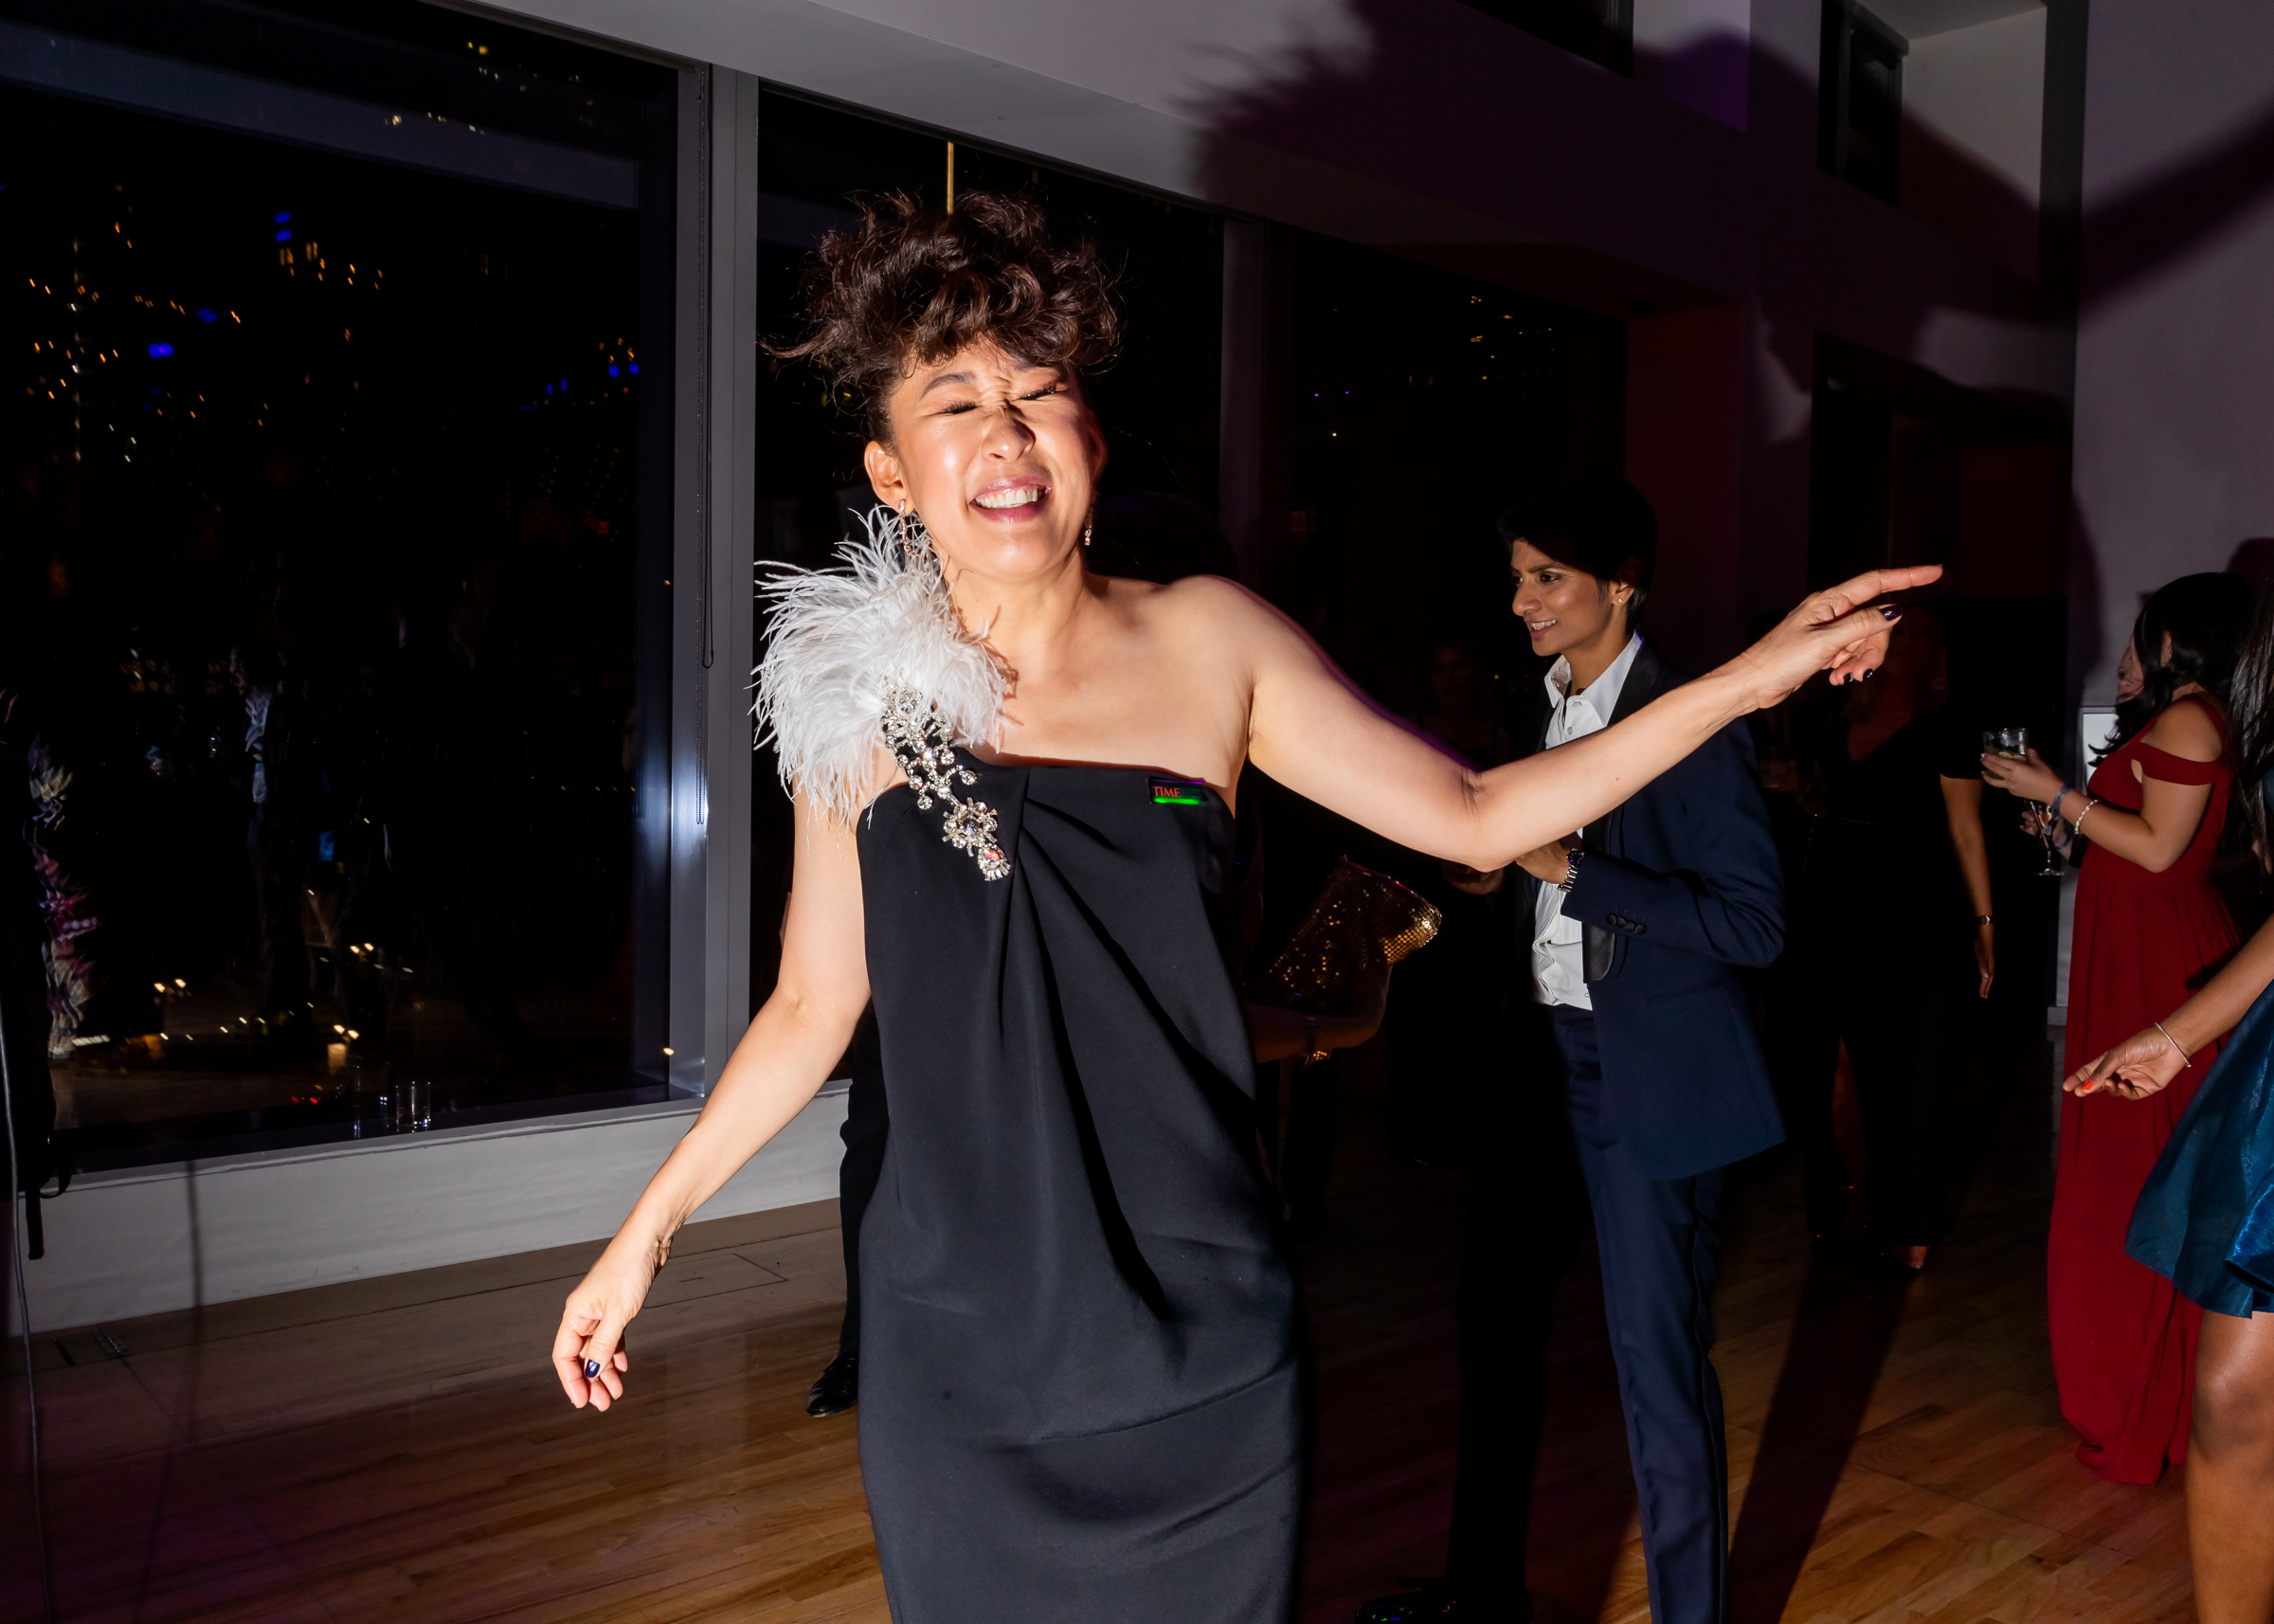 Sandra Oh at the Time 100 Gala at Jazz at Lincoln Center in New York City on April 23, 2019. (Kevin Tachman for TIME)